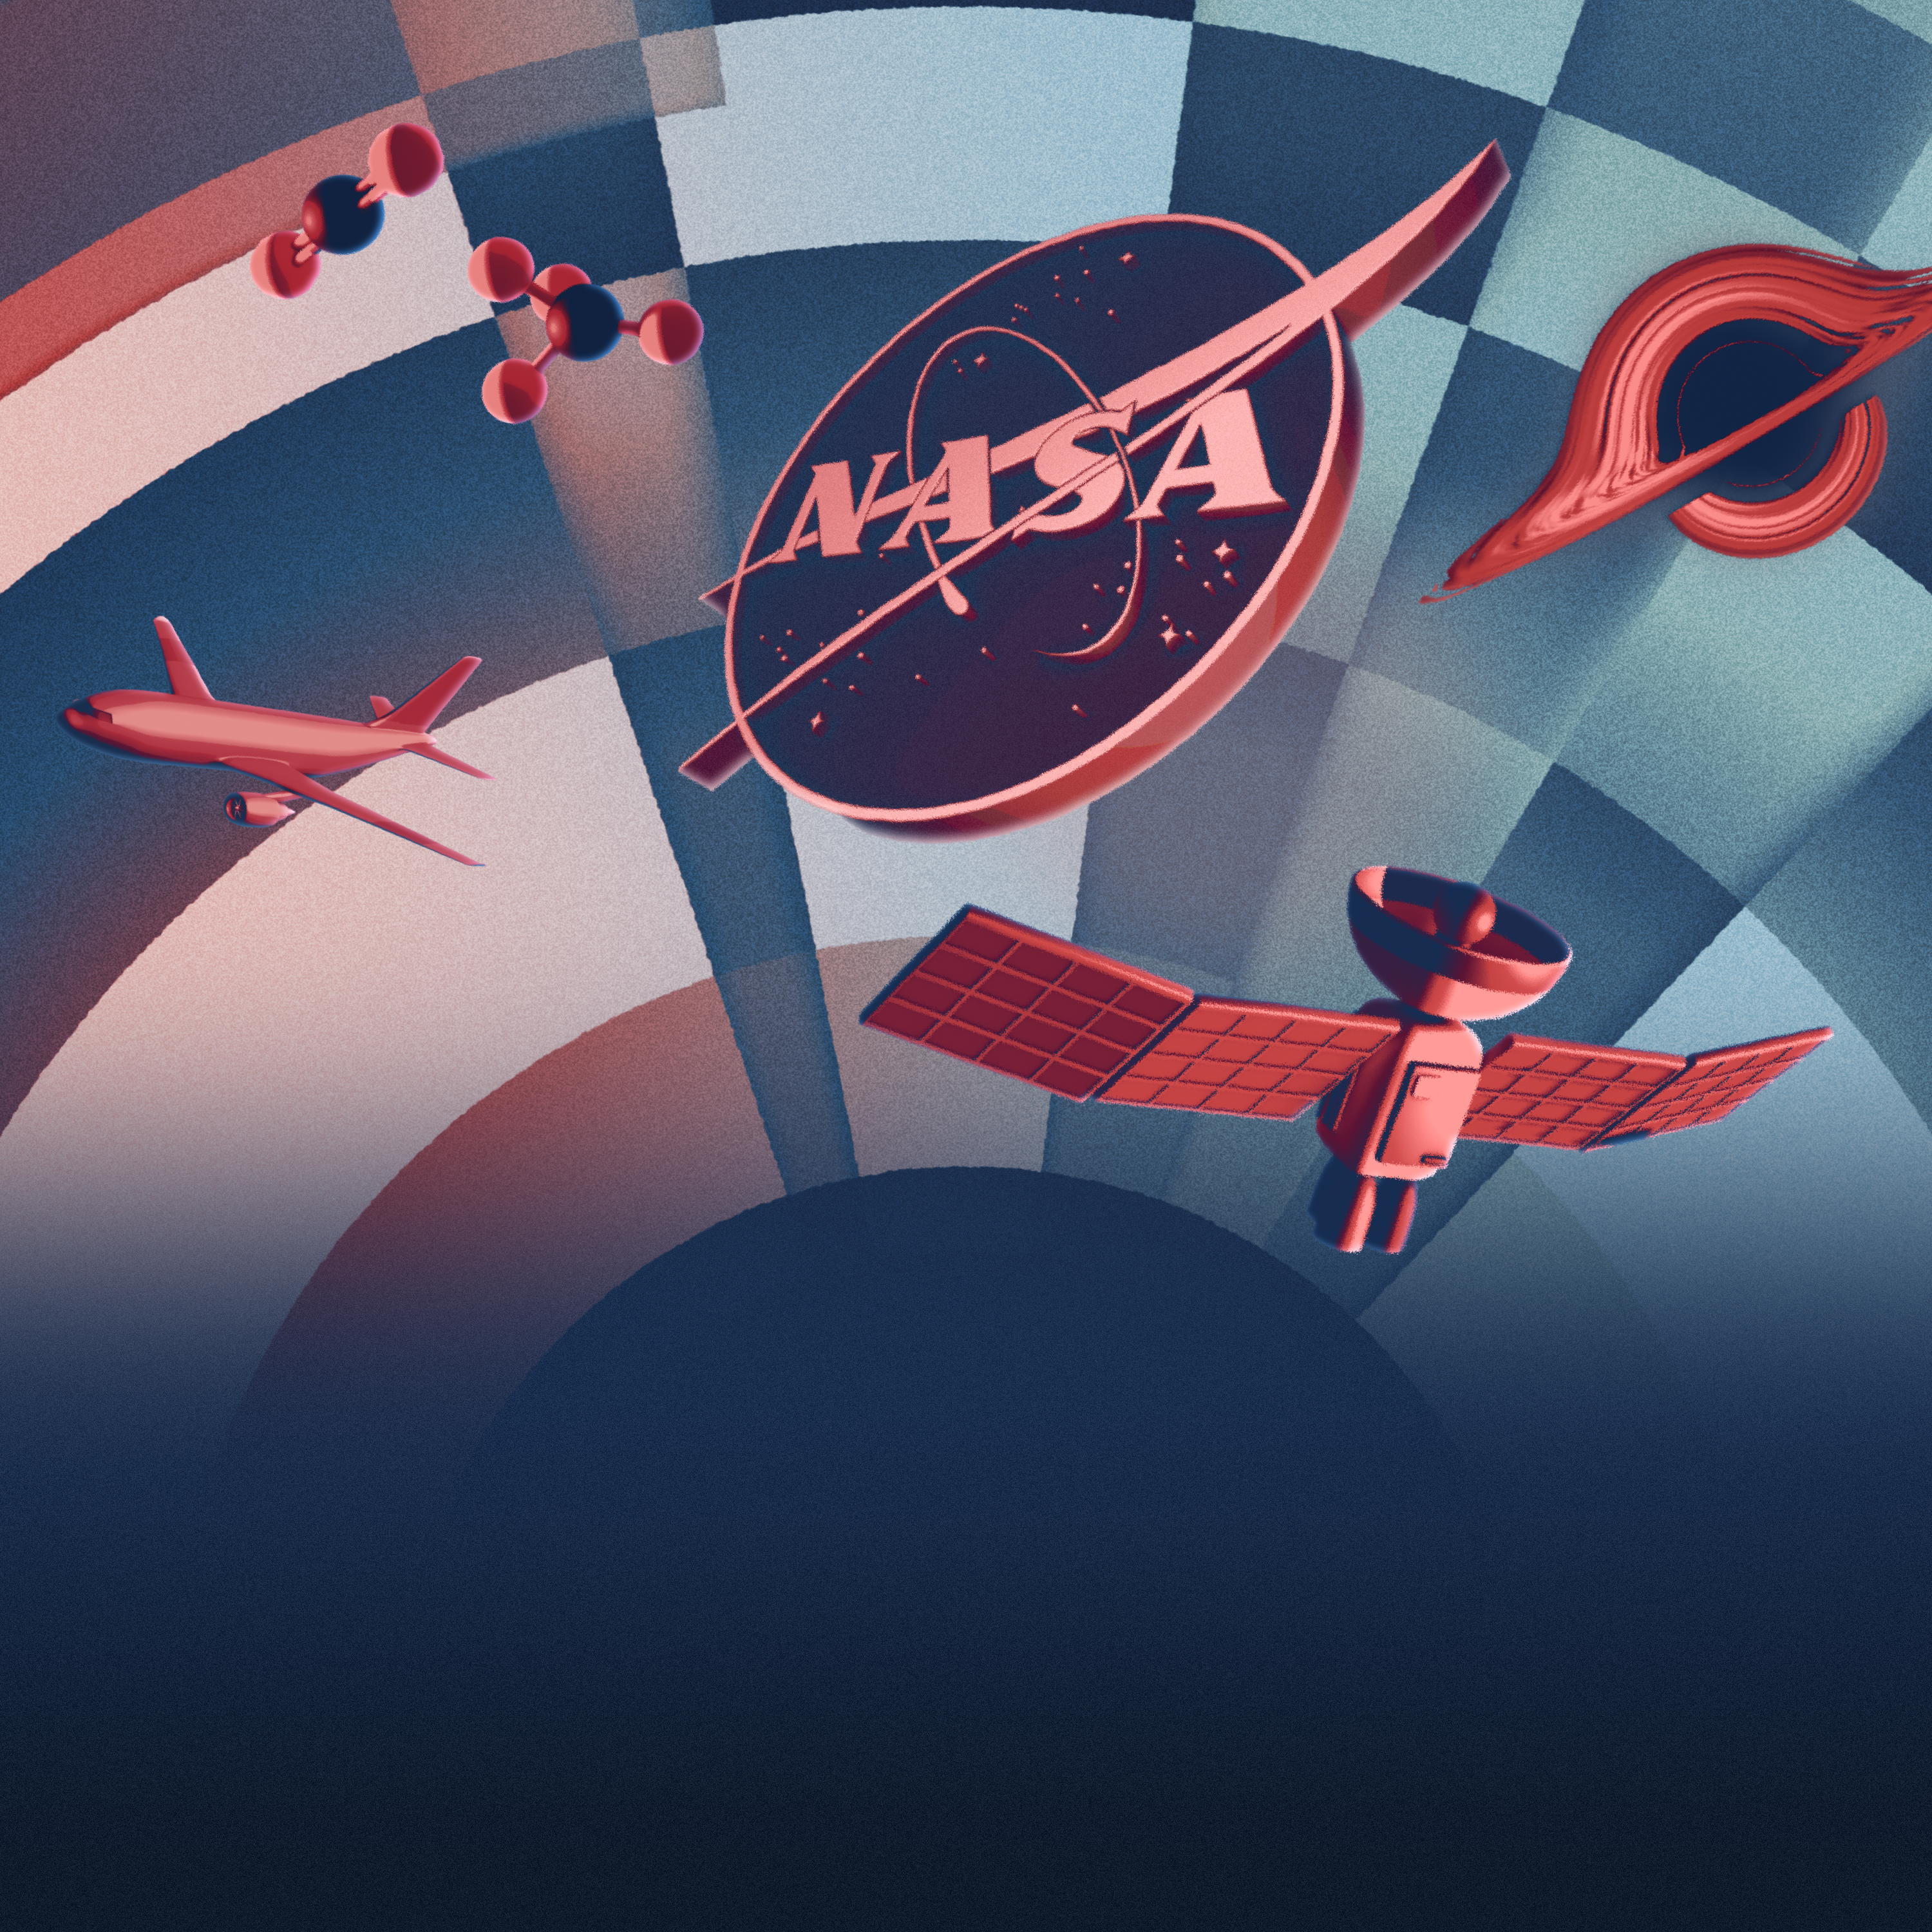 The cover art display for the NASA's Curious Universe podcast.